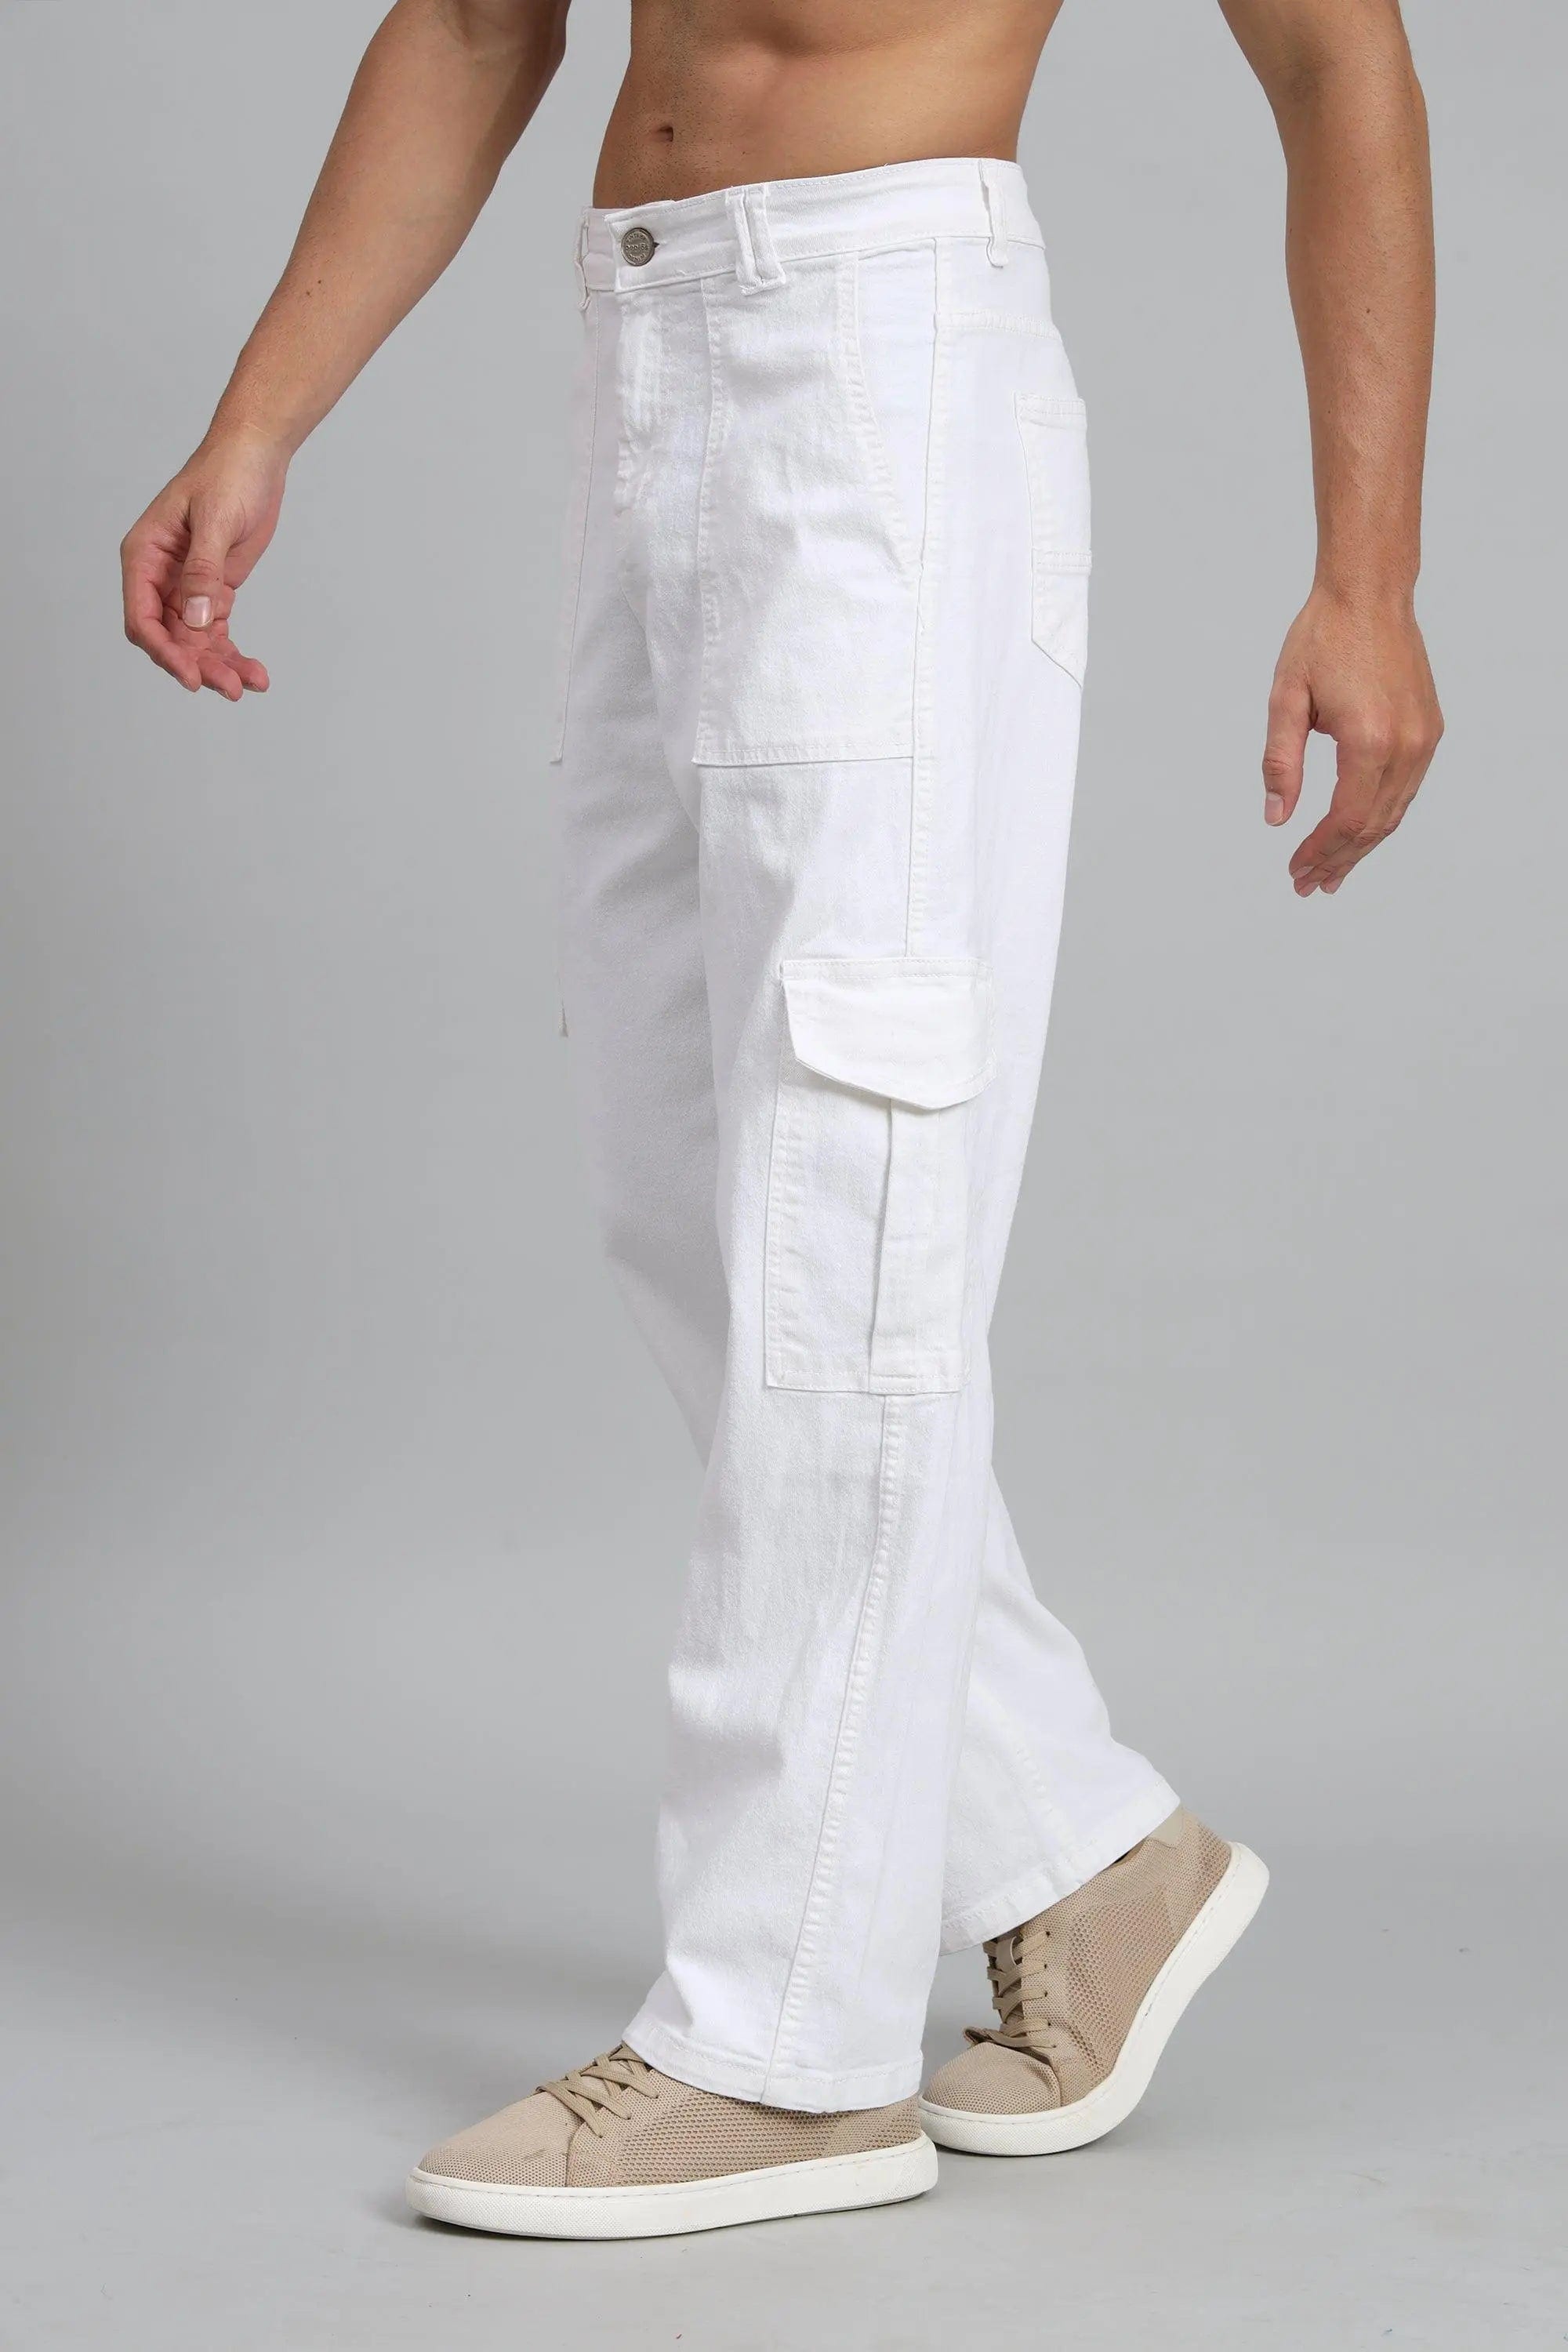 Buy Stylish Men Denim Cargo Pant Online In India At Discounted Prices